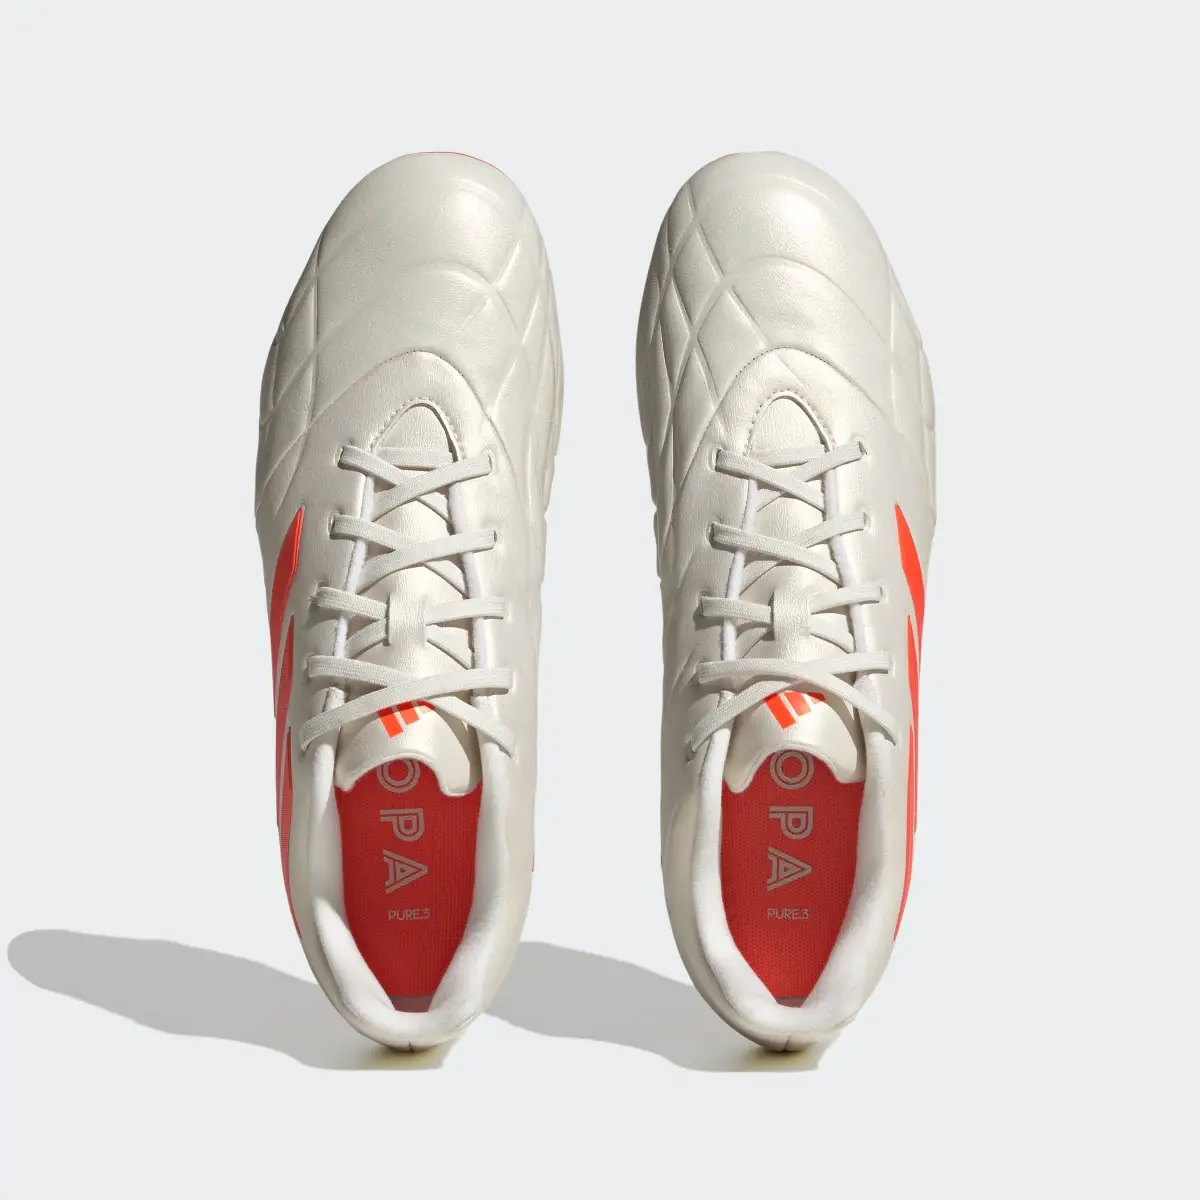 Adidas Copa Pure.3 Firm Ground Soccer Cleats. 3